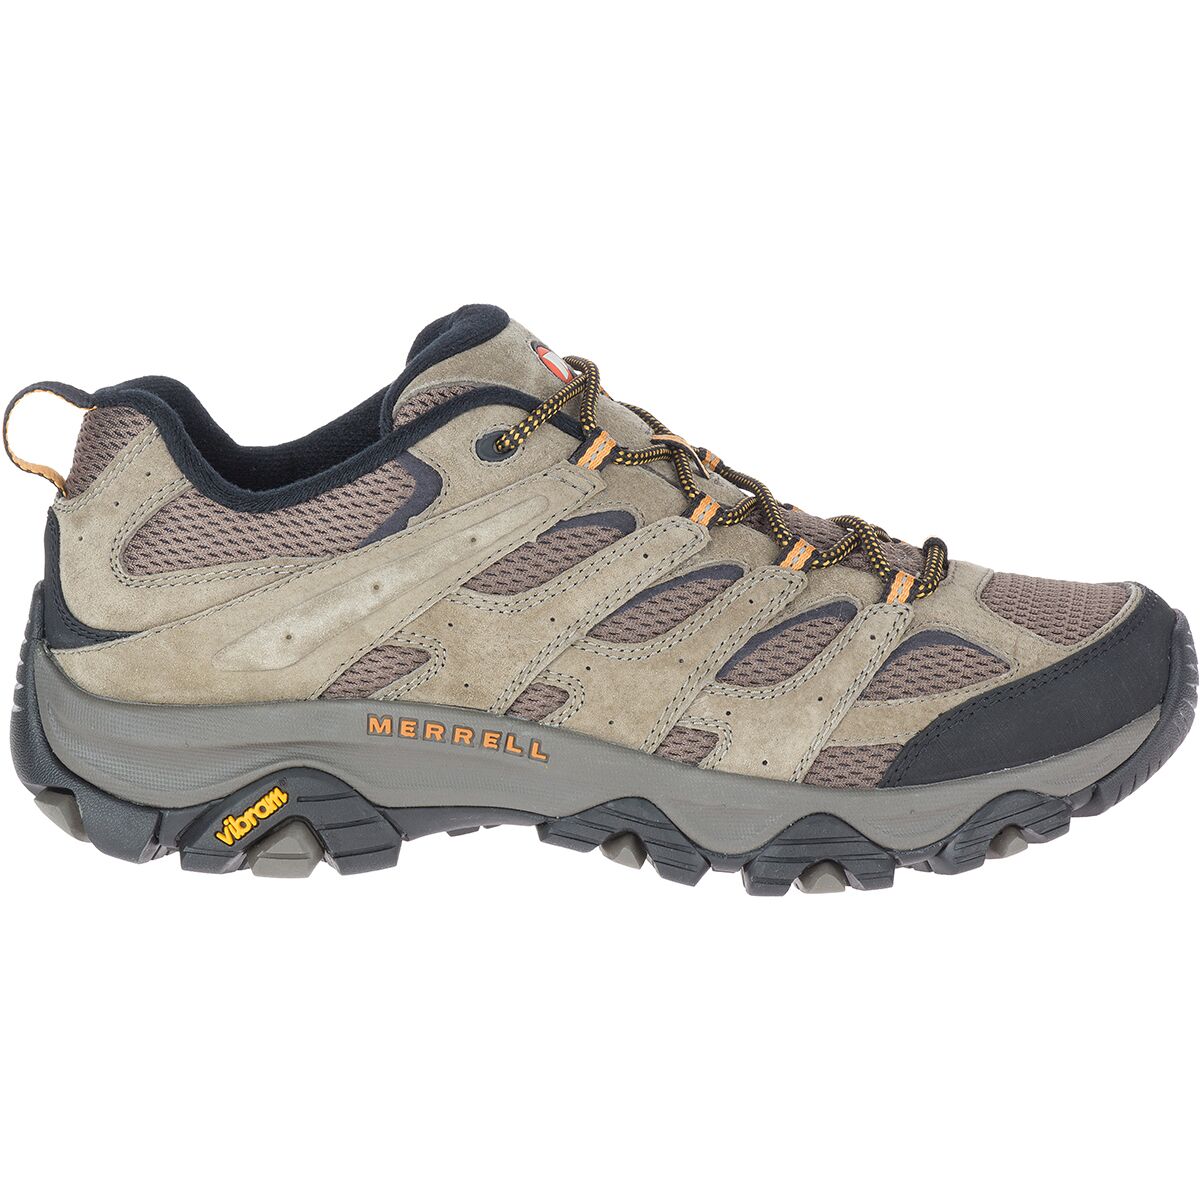 hiking boots shoes: What the pros think? www.hikingfeet.com